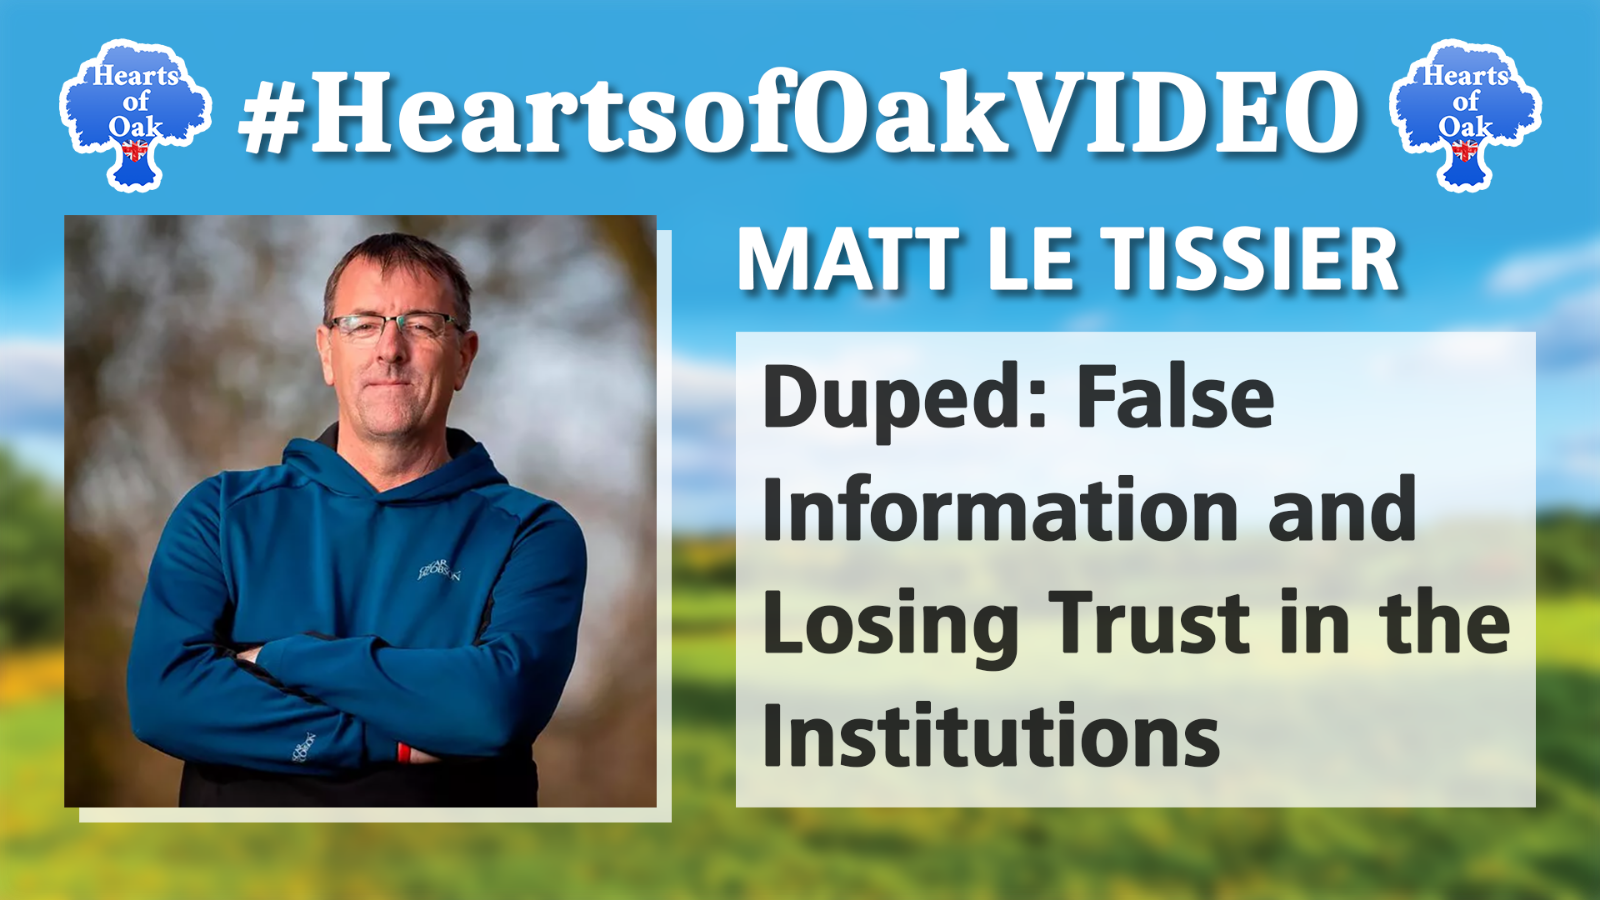 Matt Le Tissier - Duped: False Information and Losing Trust in the Institutions